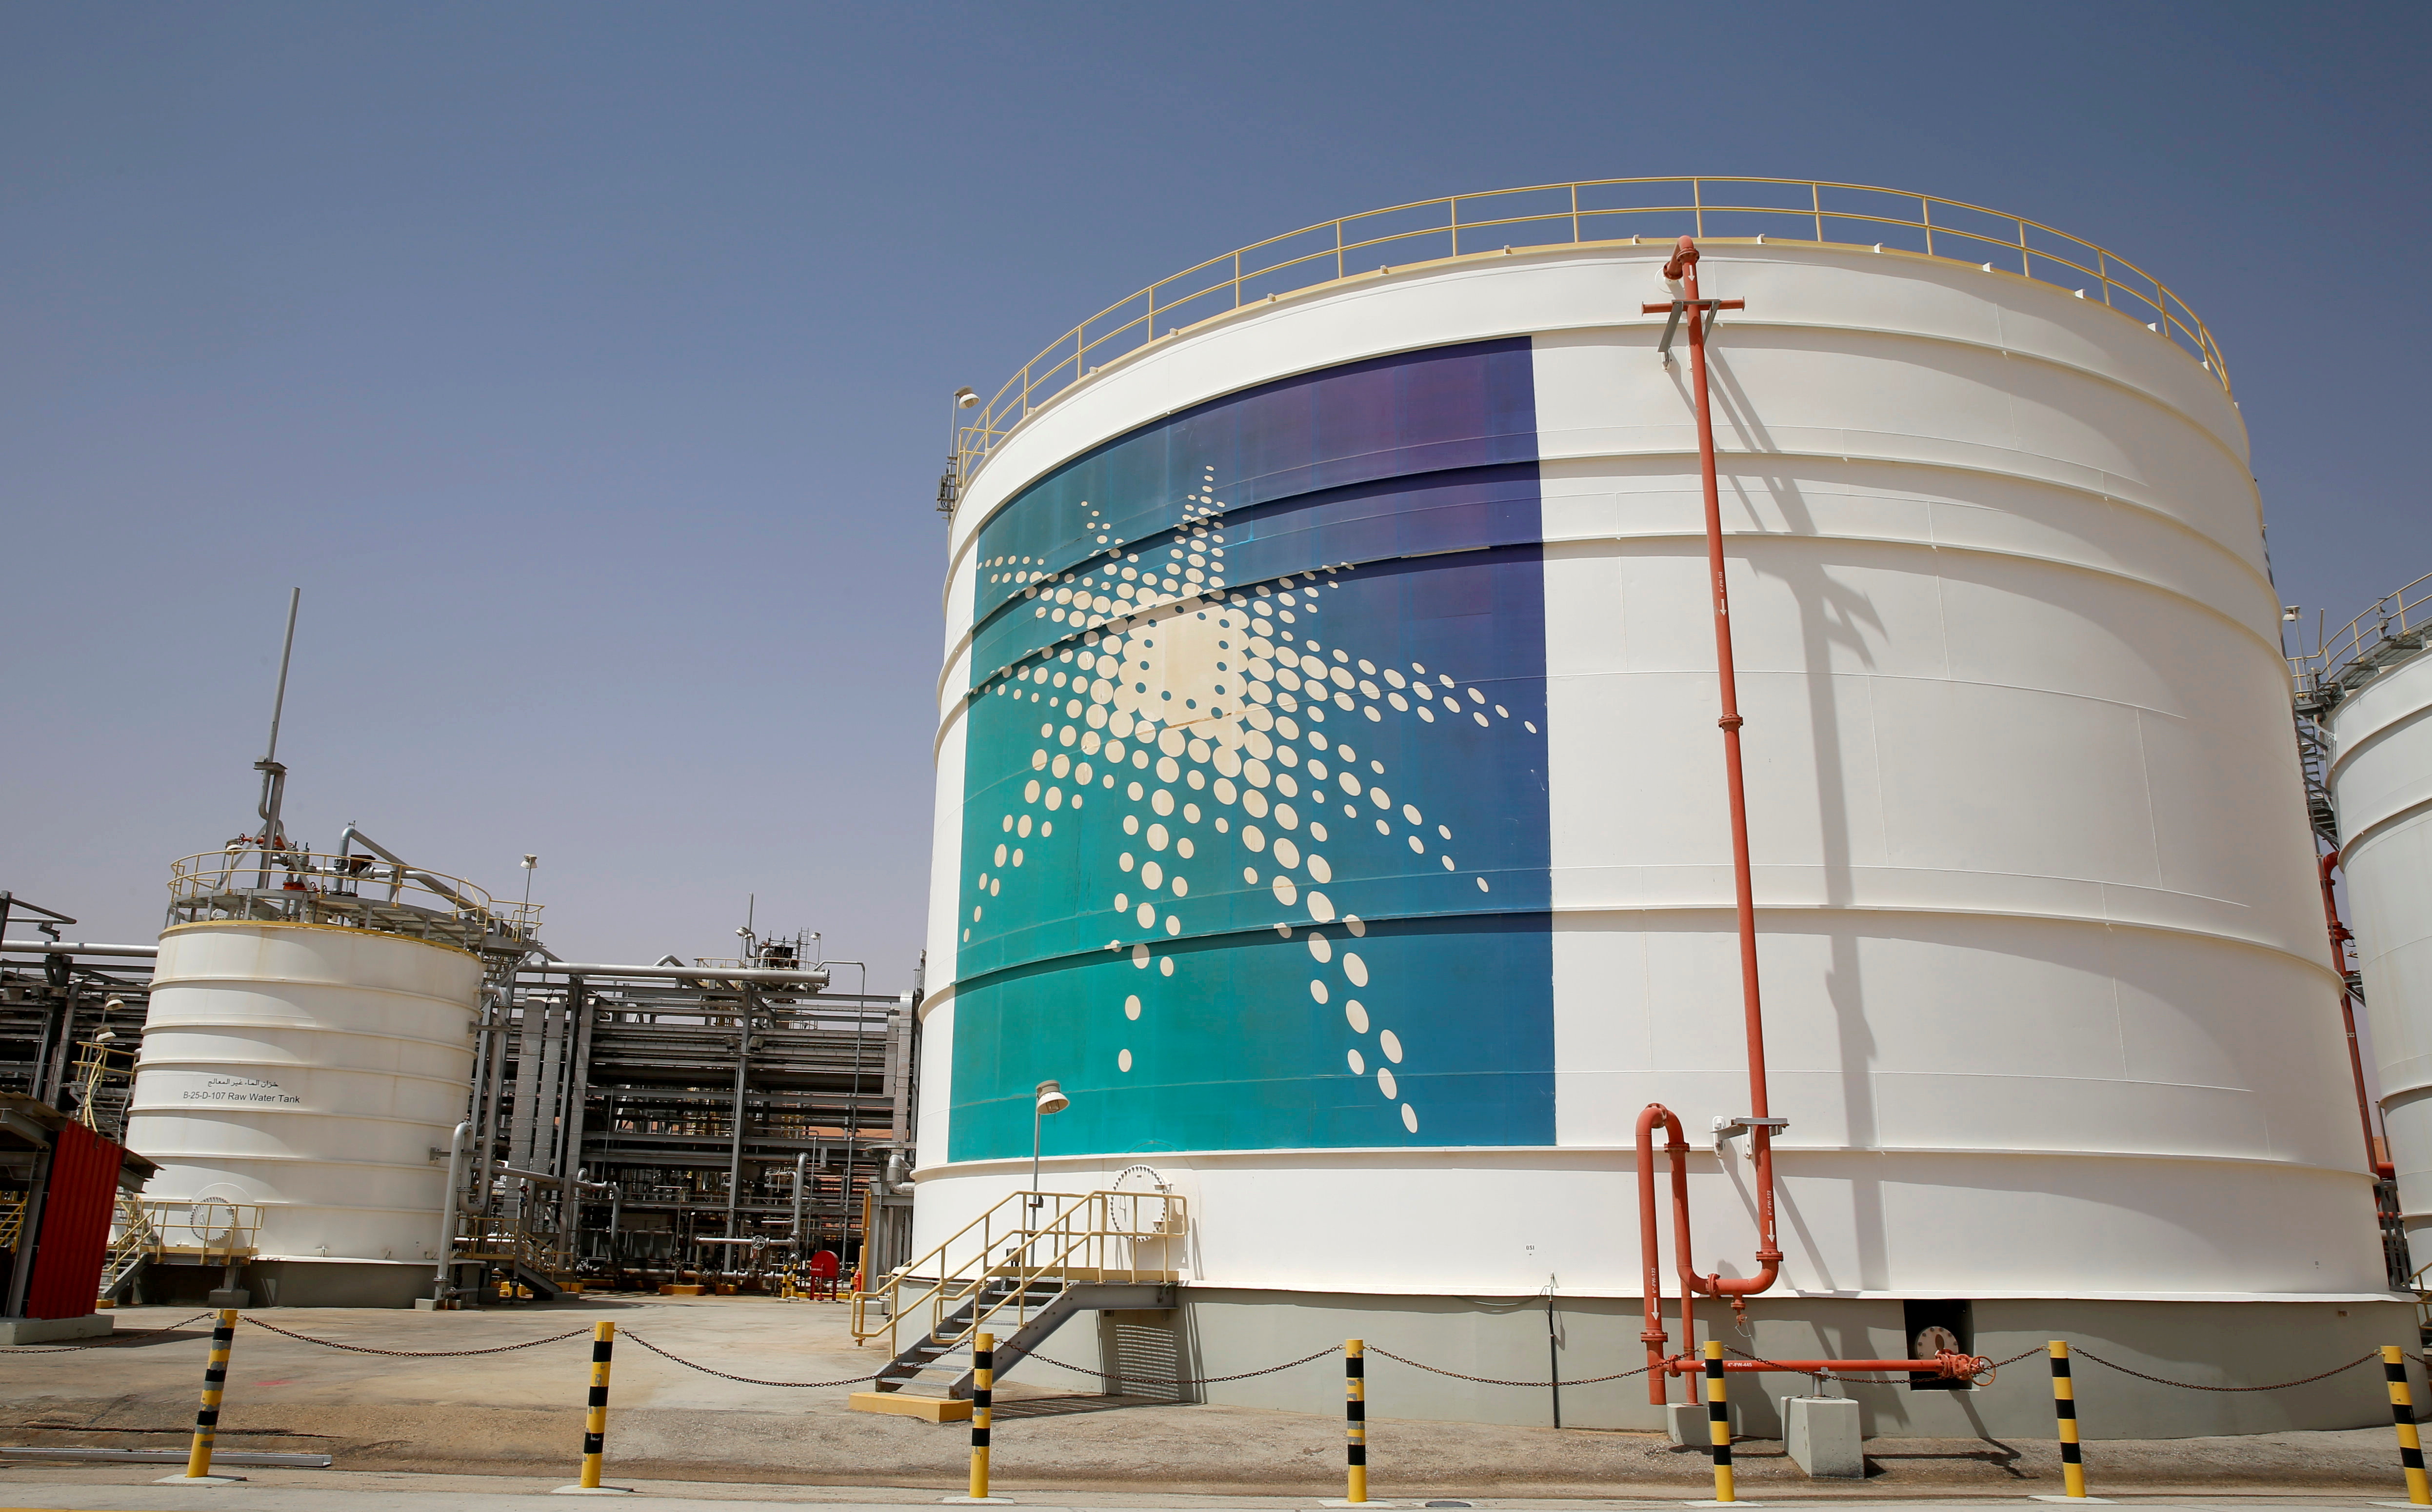 An Aramco oil tank is seen at the Production facility at Saudi Aramco's Shaybah oilfield in the Empty Quarter